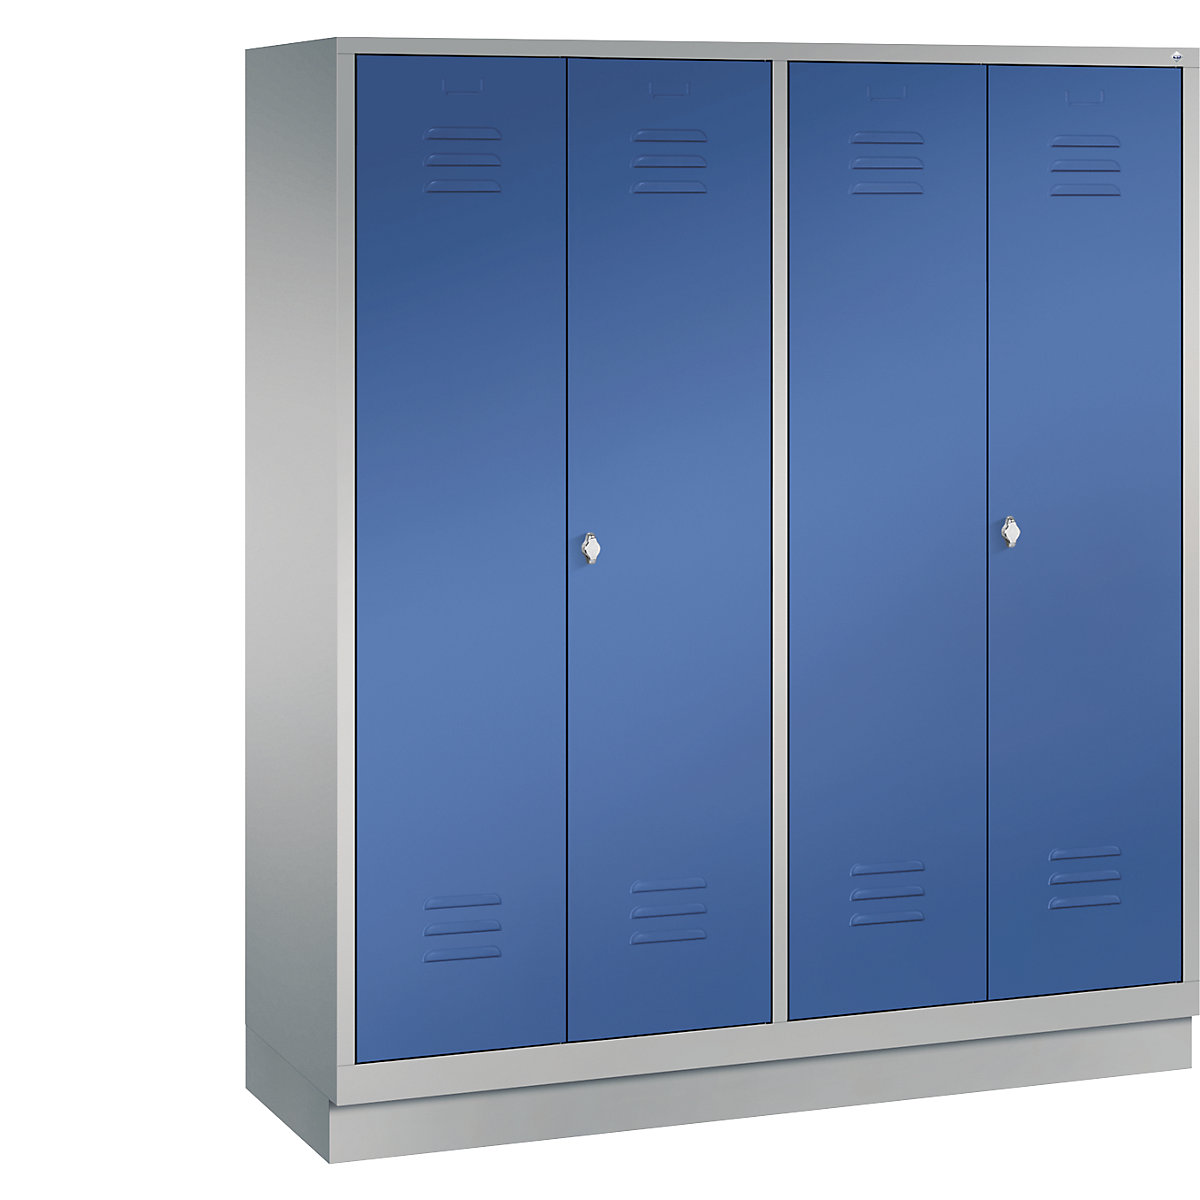 CLASSIC cloakroom locker with plinth, doors close in the middle – C+P, 4 compartments, compartment width 400 mm, white aluminium / gentian blue-7